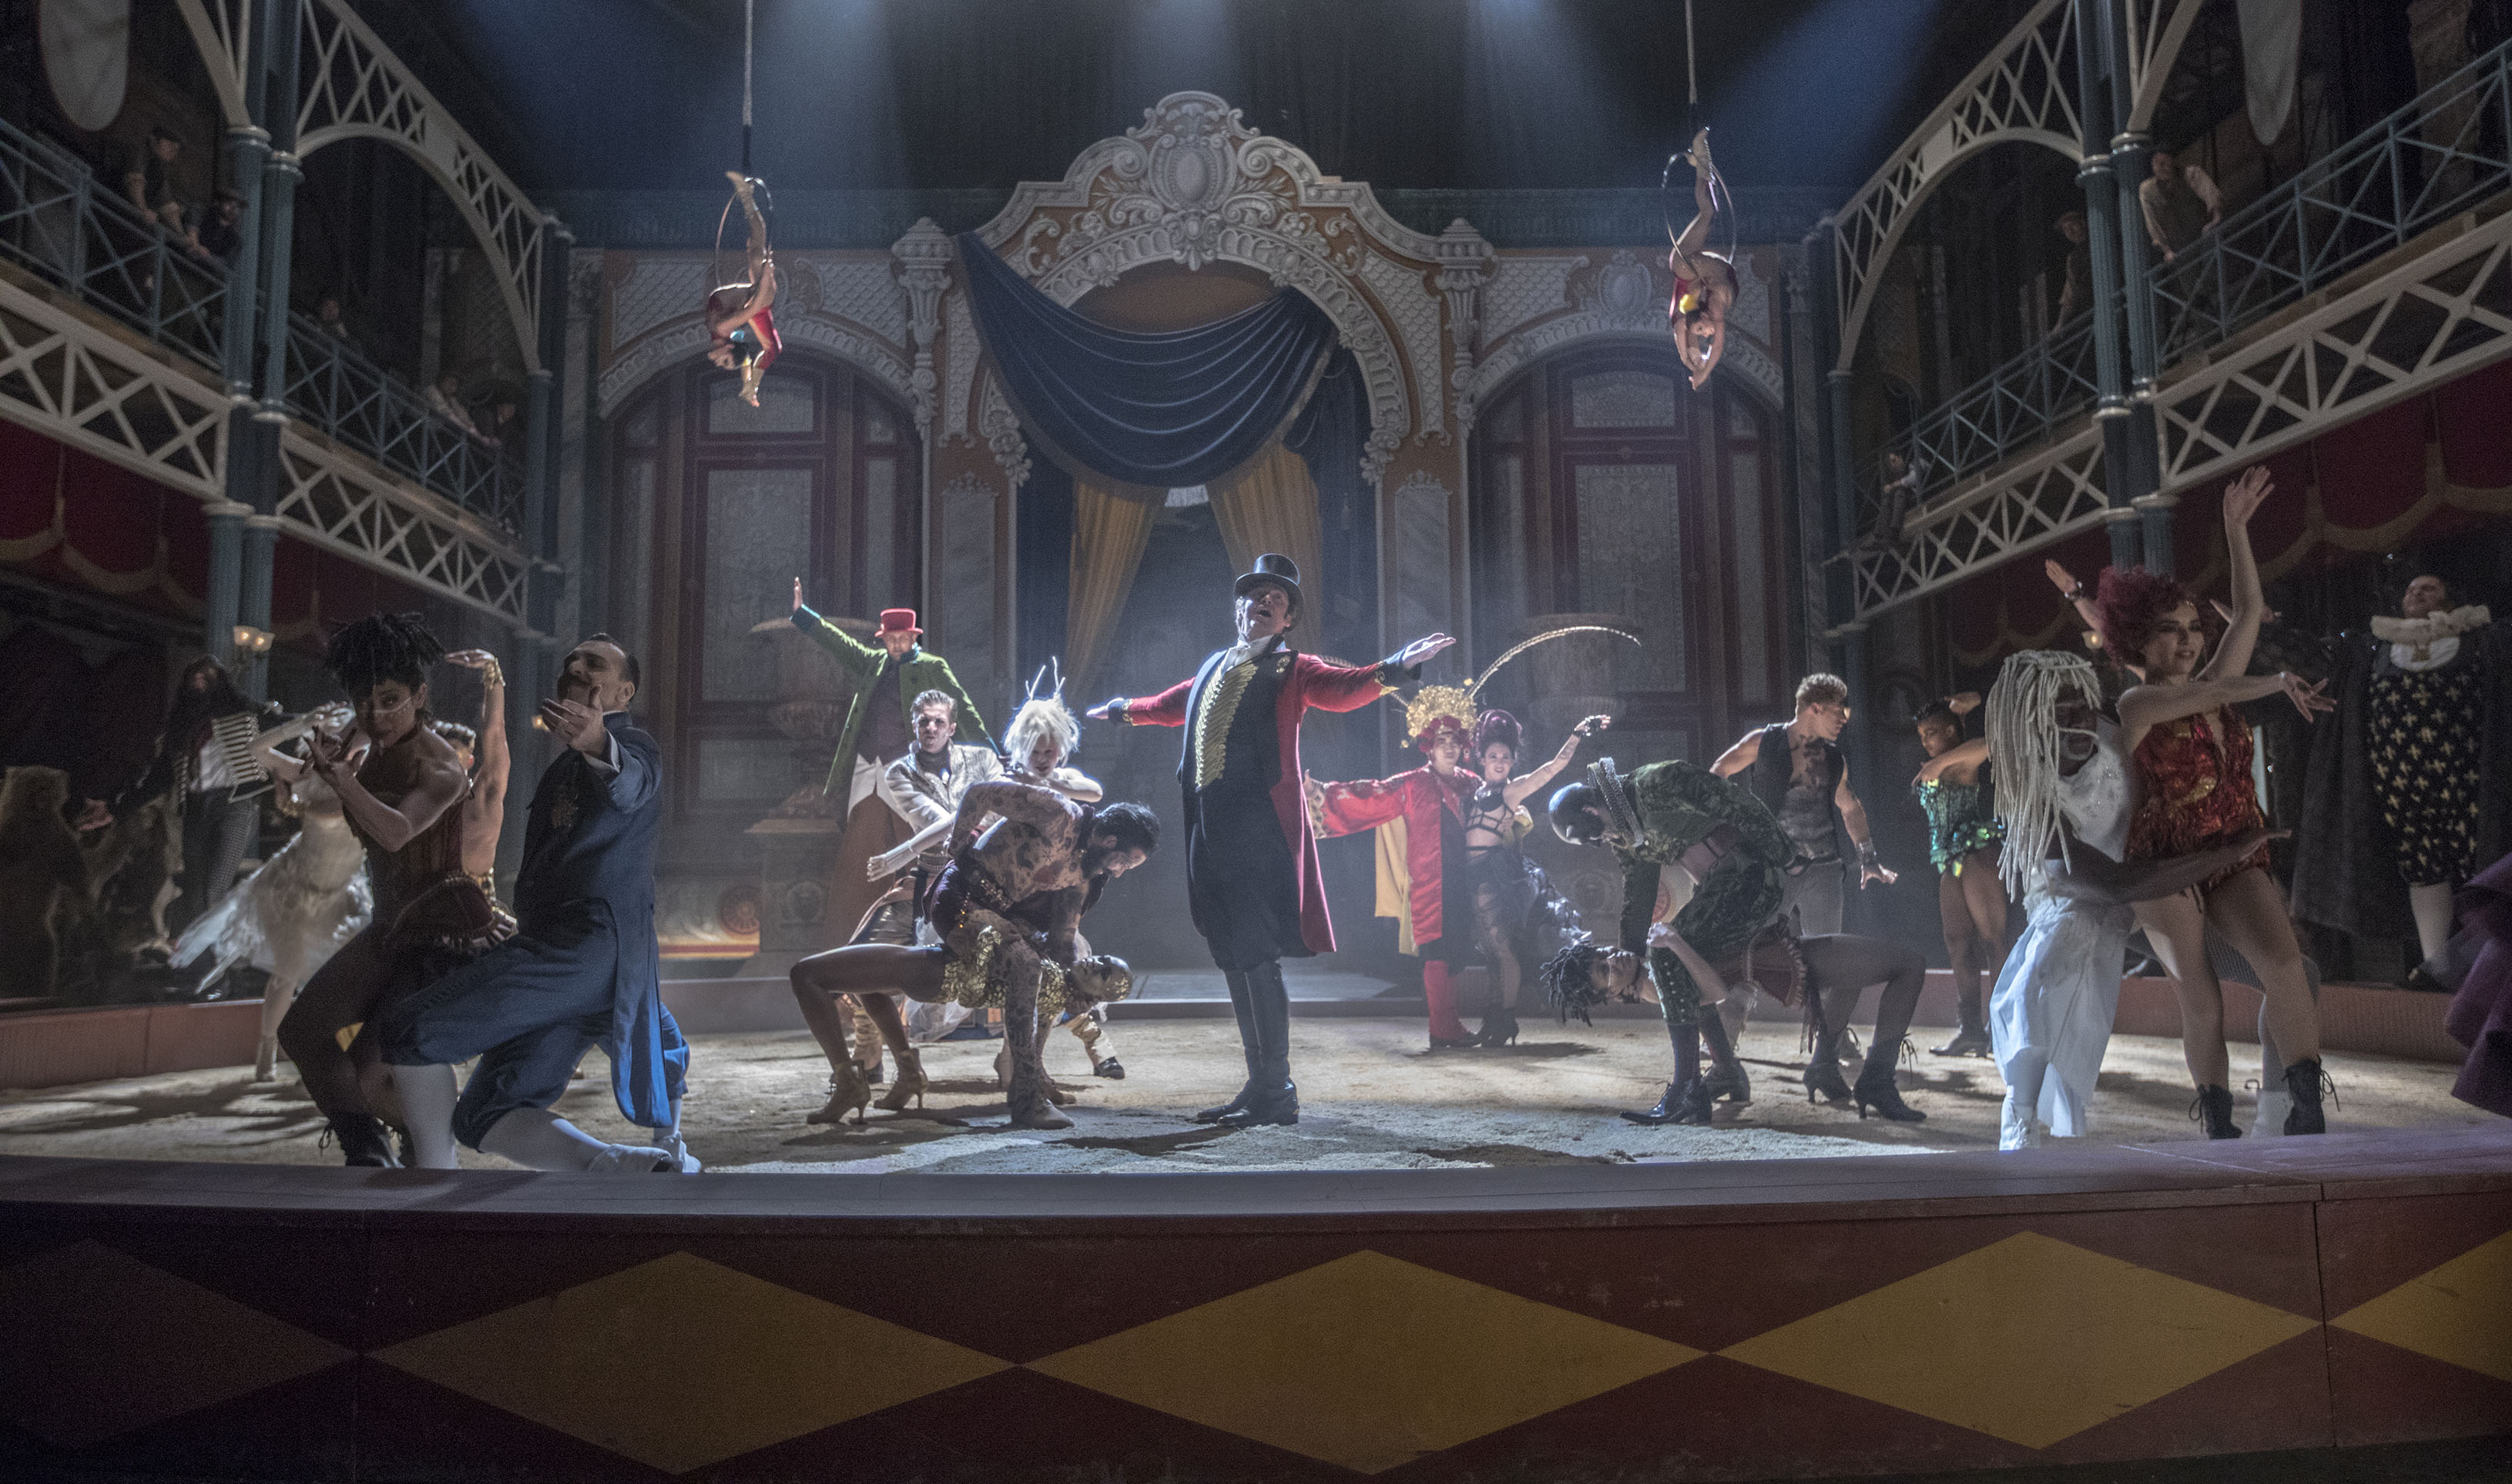 REVIEW: THE GREATEST SHOWMAN